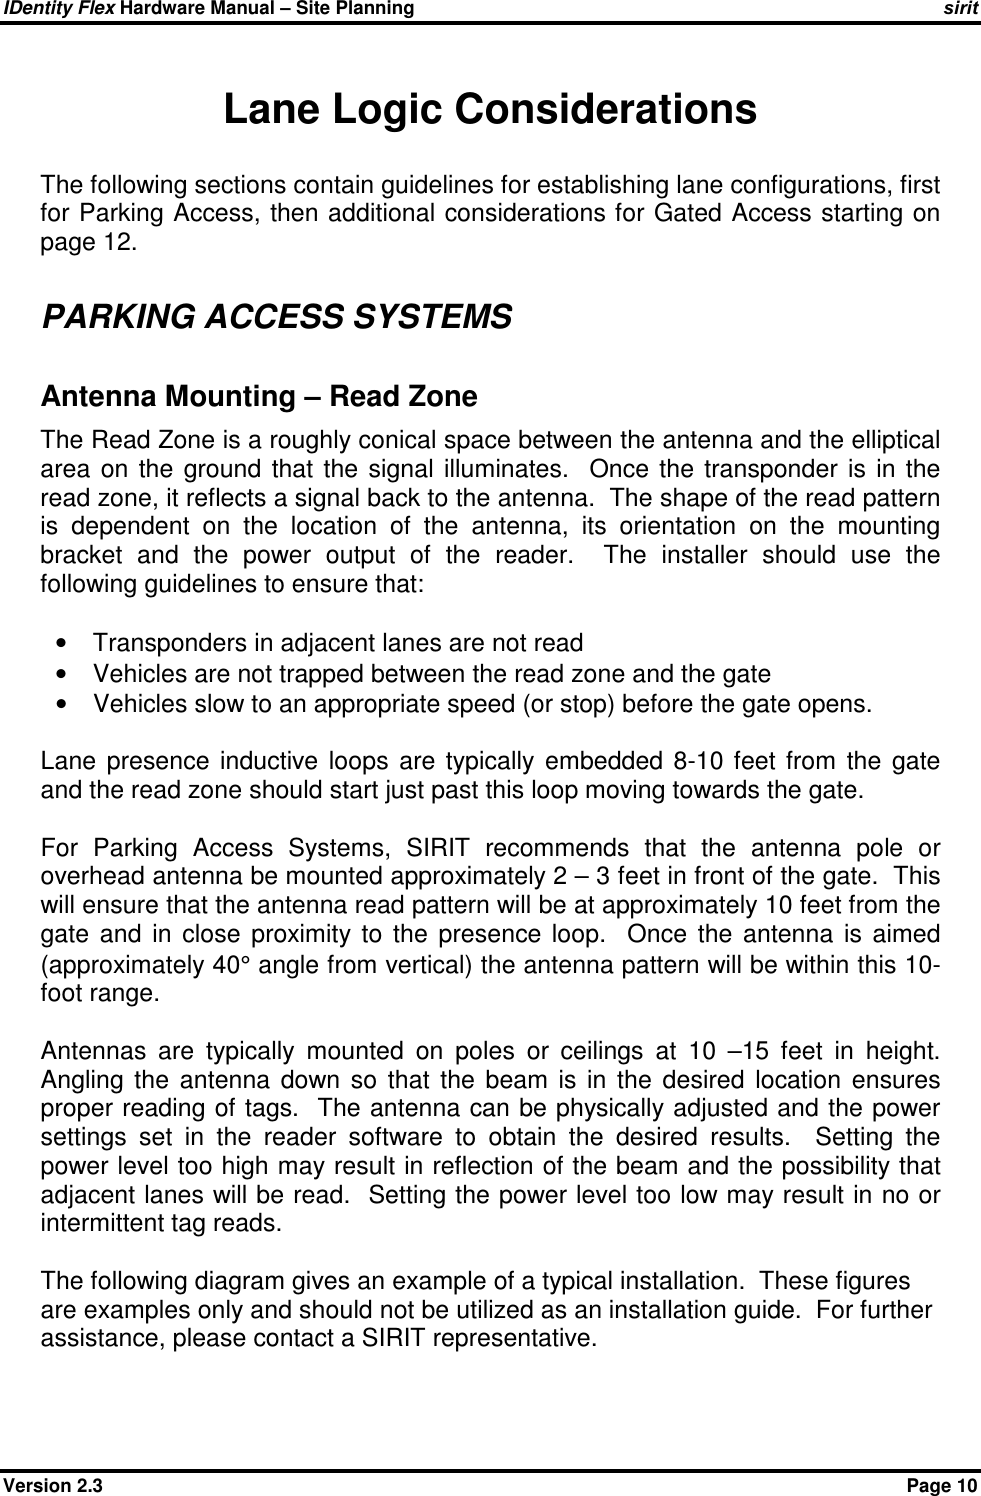 IDentity Flex Hardware Manual – Site Planning    sirit Version 2.3    Page 10 Lane Logic Considerations The following sections contain guidelines for establishing lane configurations, first for Parking Access, then additional considerations for Gated Access starting on page 12.  PARKING ACCESS SYSTEMS Antenna Mounting – Read Zone The Read Zone is a roughly conical space between the antenna and the elliptical area  on  the  ground  that  the  signal  illuminates.    Once  the  transponder  is  in  the read zone, it reflects a signal back to the antenna.  The shape of the read pattern is  dependent  on  the  location  of  the  antenna,  its  orientation  on  the  mounting bracket  and  the  power  output  of  the  reader.    The  installer  should  use  the following guidelines to ensure that:  •  Transponders in adjacent lanes are not read •  Vehicles are not trapped between the read zone and the gate •  Vehicles slow to an appropriate speed (or stop) before the gate opens.  Lane  presence  inductive  loops  are  typically  embedded  8-10  feet  from  the  gate and the read zone should start just past this loop moving towards the gate.    For  Parking  Access  Systems,  SIRIT  recommends  that  the  antenna  pole  or overhead antenna be mounted approximately 2 – 3 feet in front of the gate.  This will ensure that the antenna read pattern will be at approximately 10 feet from the gate  and  in  close  proximity  to  the  presence  loop.    Once  the  antenna  is  aimed (approximately 40° angle from vertical) the antenna pattern will be within this 10-foot range.   Antennas  are  typically  mounted  on  poles  or  ceilings  at  10  –15  feet  in  height.  Angling  the  antenna  down  so  that  the  beam  is  in  the  desired  location  ensures proper reading of tags.  The antenna can be physically adjusted and the power settings  set  in  the  reader  software  to  obtain  the  desired  results.    Setting  the power level too high may result in reflection of the beam and the possibility that adjacent lanes will be read.  Setting the power level too low may result in no or intermittent tag reads.  The following diagram gives an example of a typical installation.  These figures are examples only and should not be utilized as an installation guide.  For further assistance, please contact a SIRIT representative.  